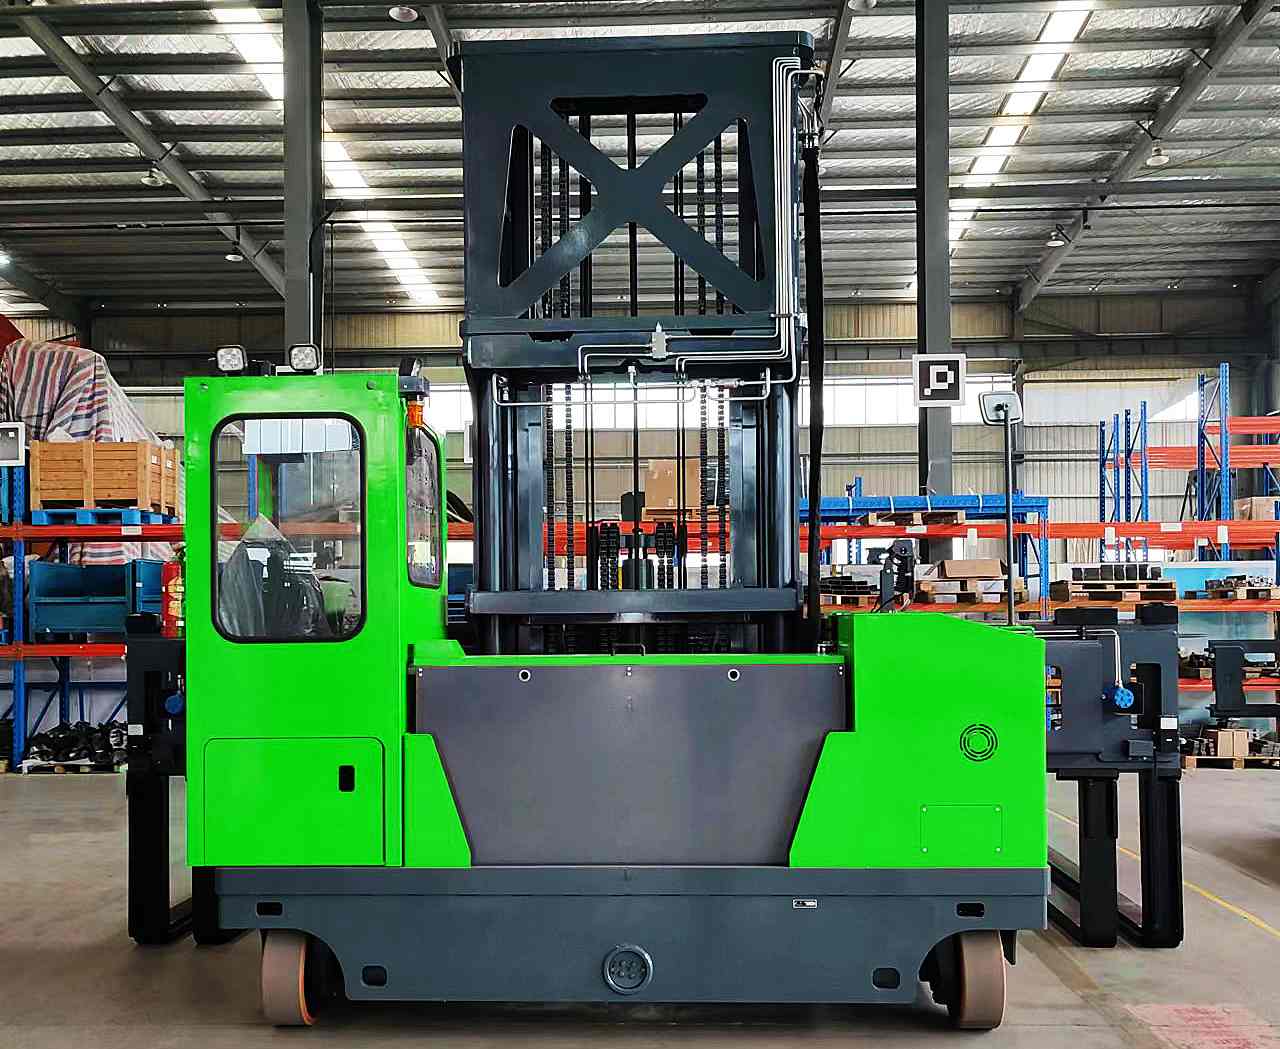 Application of Seated type multi-directional reach truck